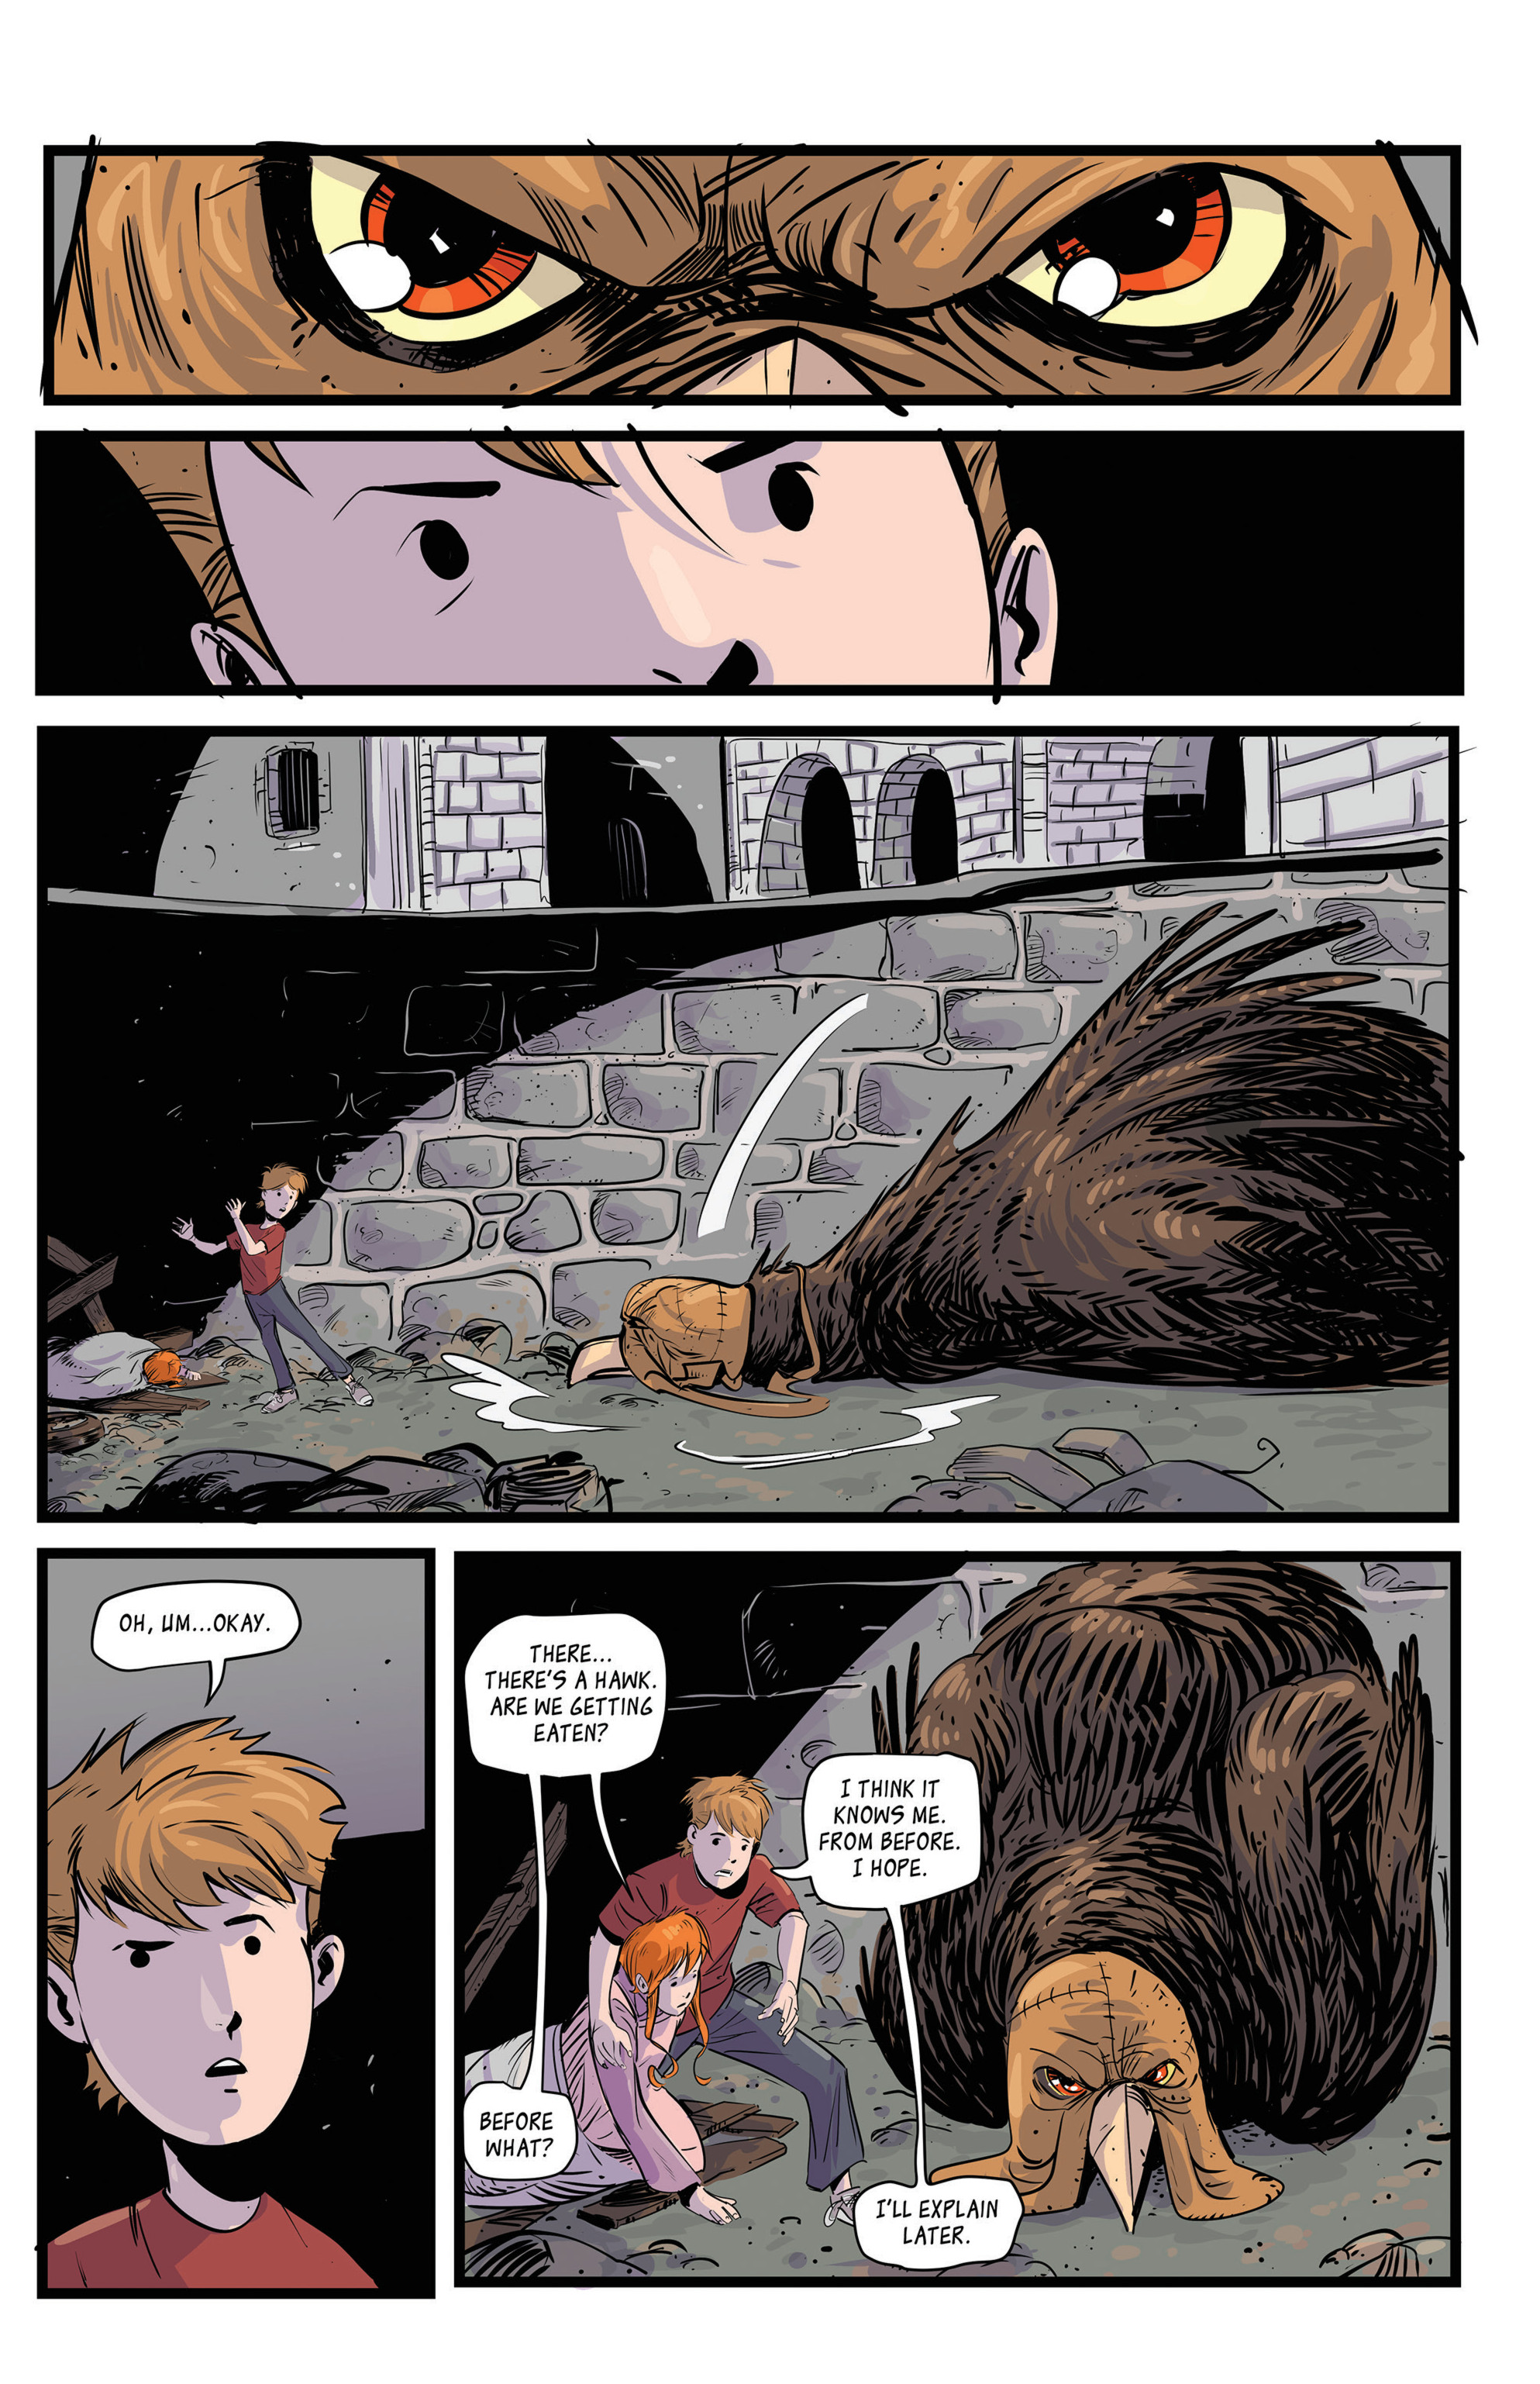 William the Last: Shadow of the Crown Vol. 3 (2019-): Chapter 4 - Page 4